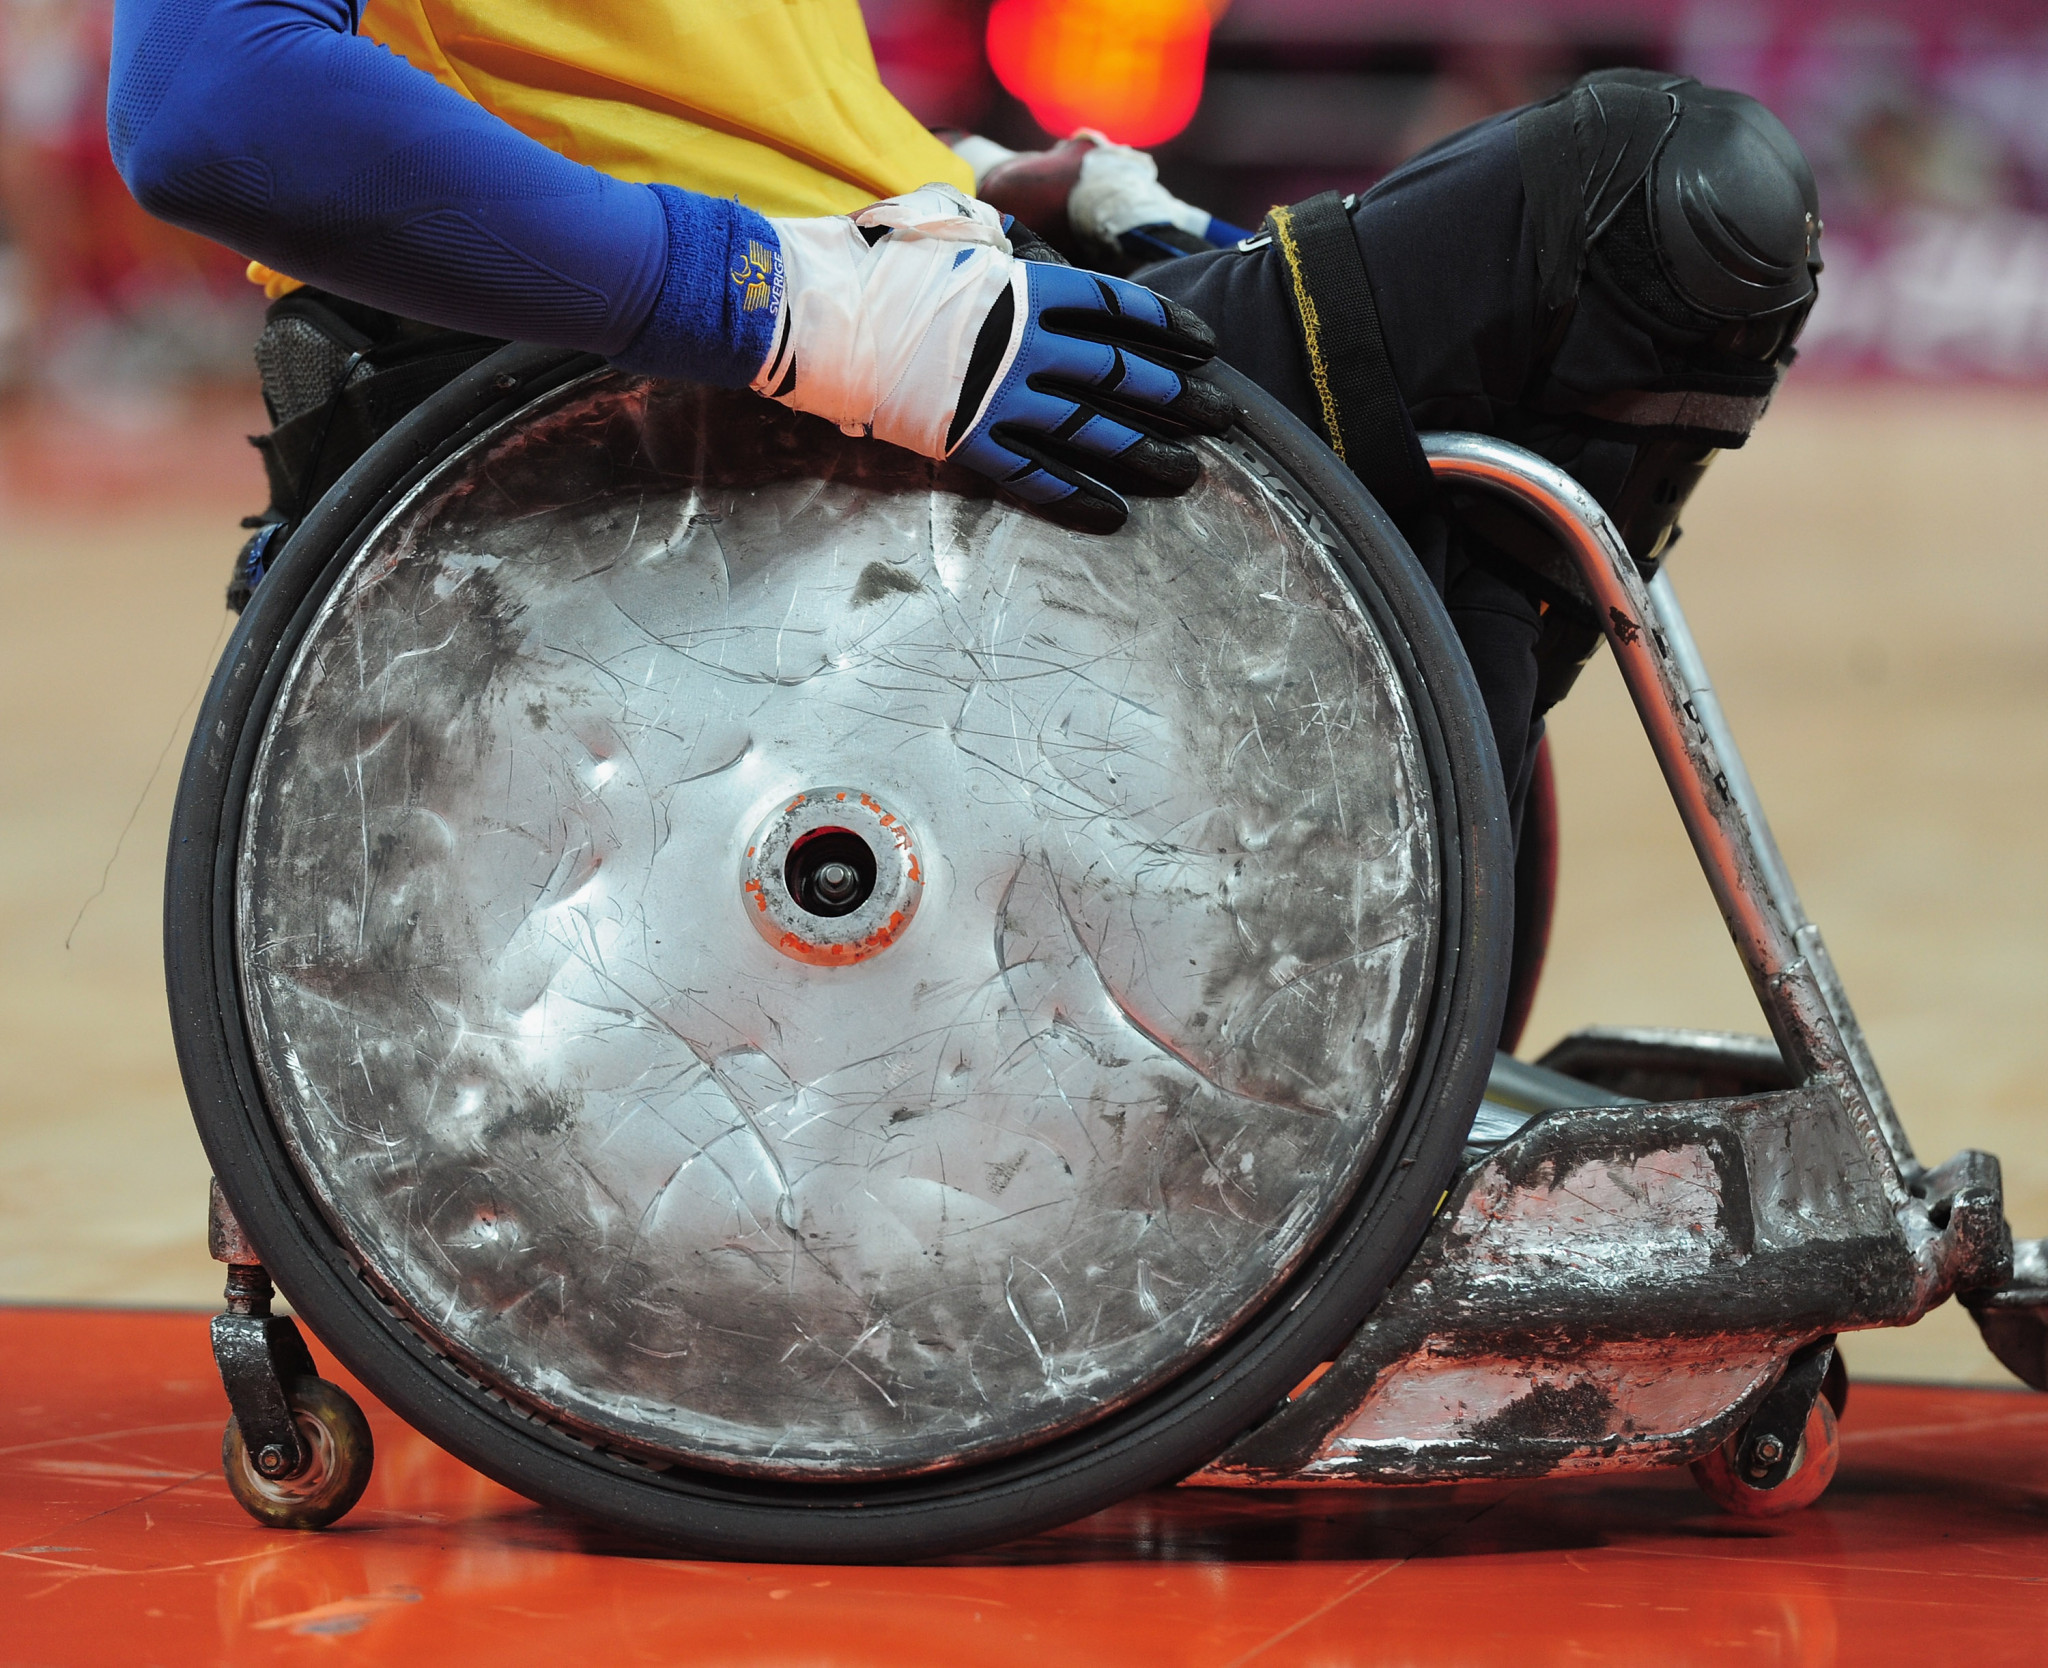 World Wheelchair Rugby chief executive Griffiths set to resign